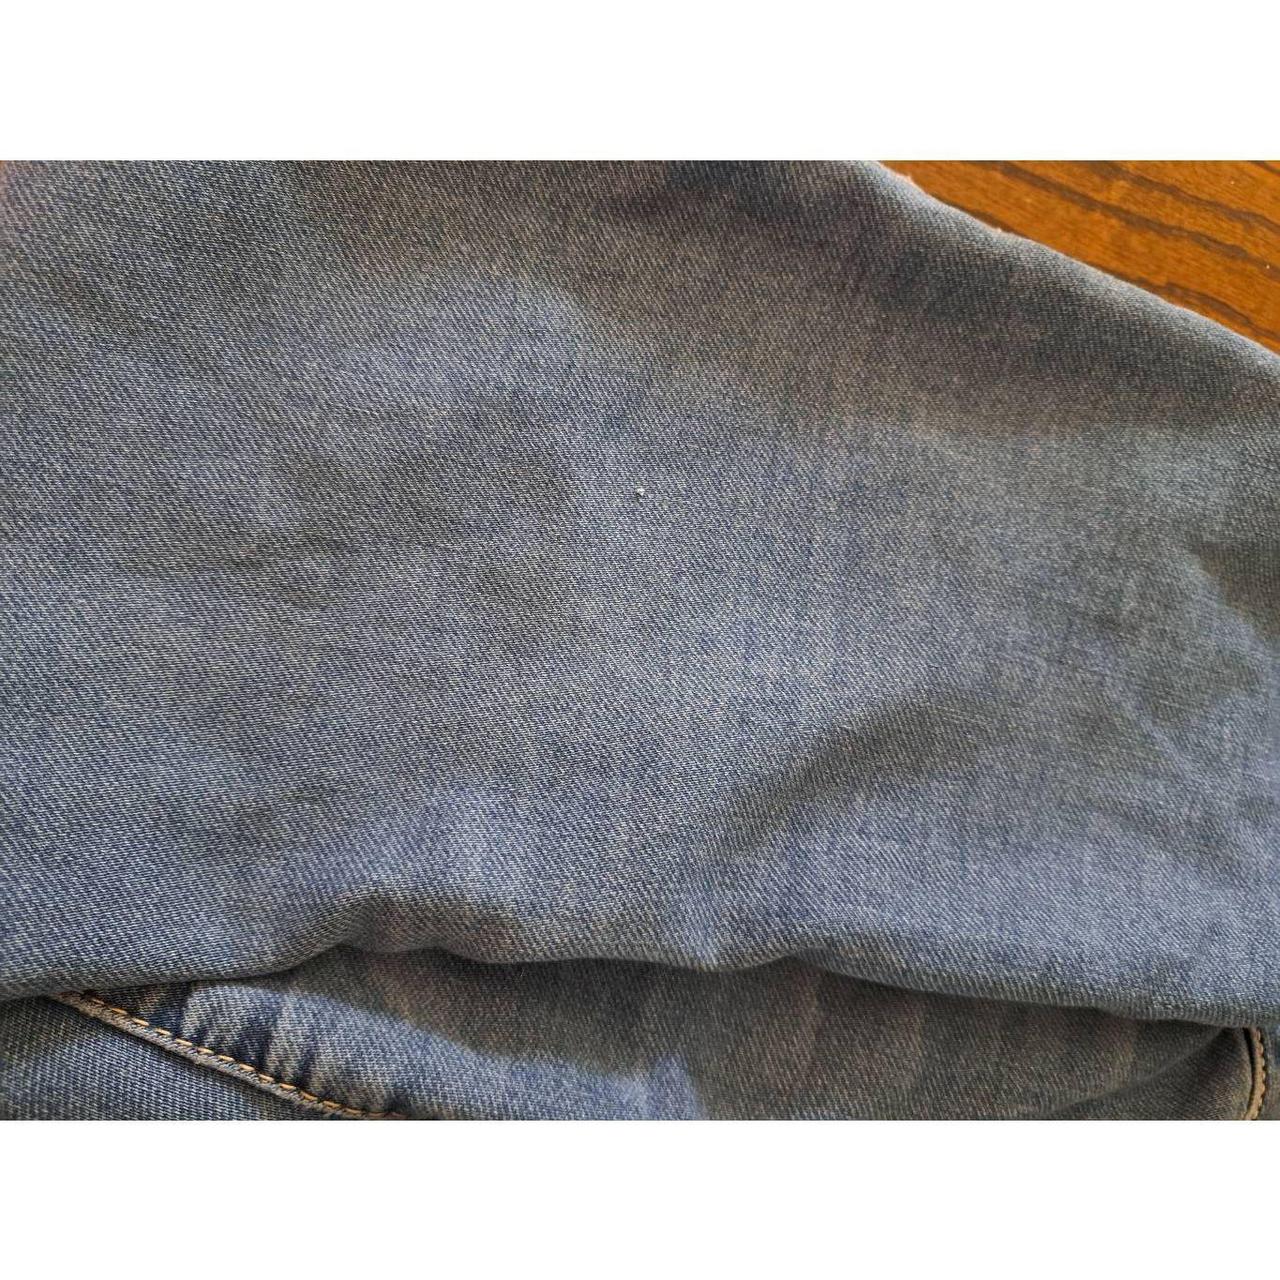 seven7 jeans! mint condition mid rise jeans. theyre - Depop